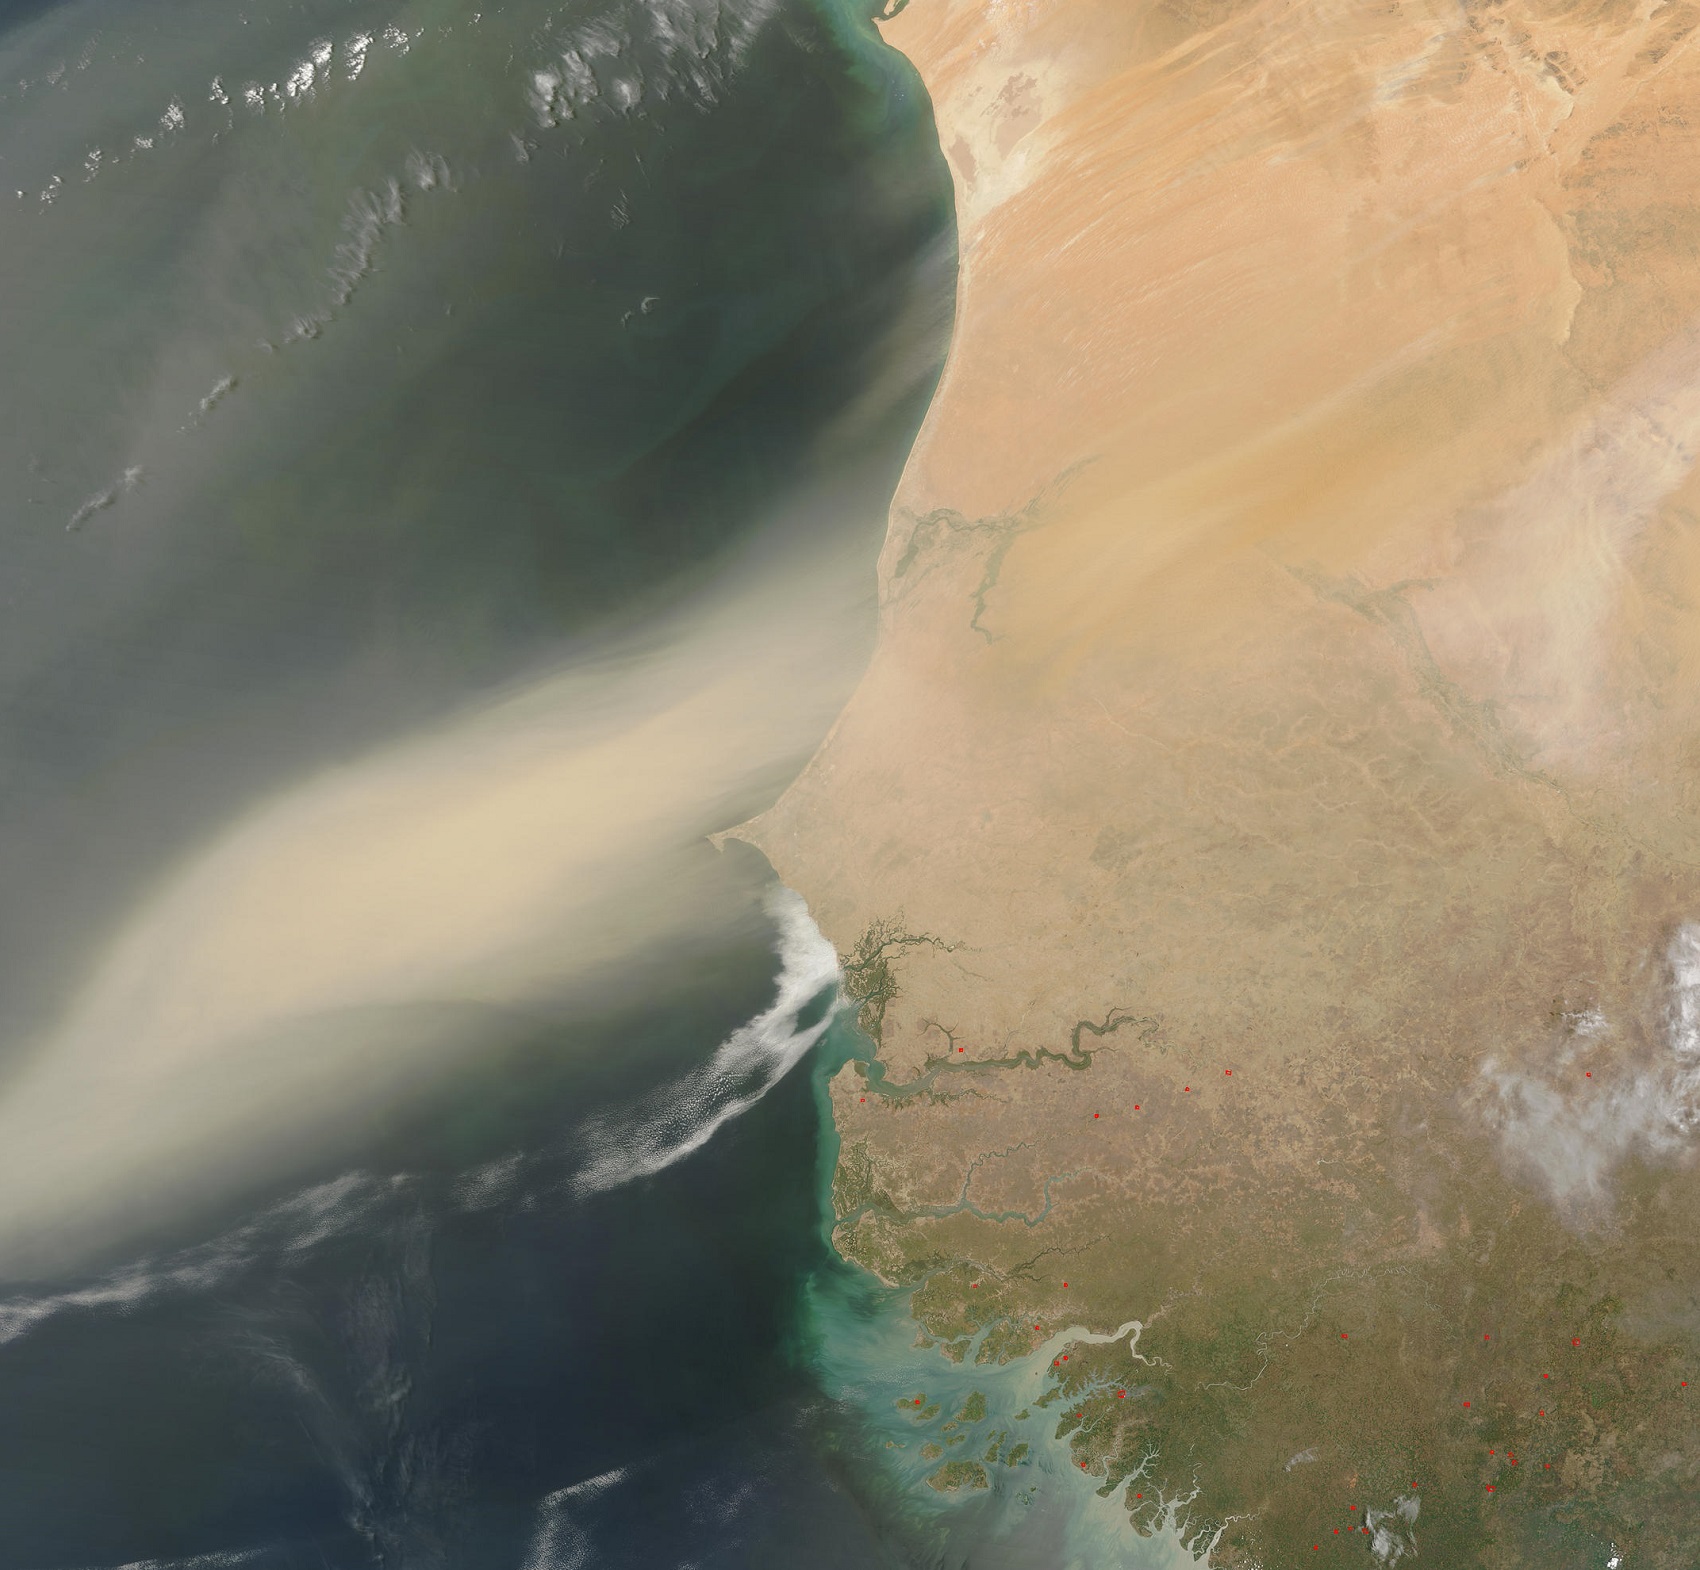 2003 satellite image shows a large dust plume blowing off the Sahara Desert and out over the Atlantic Ocean